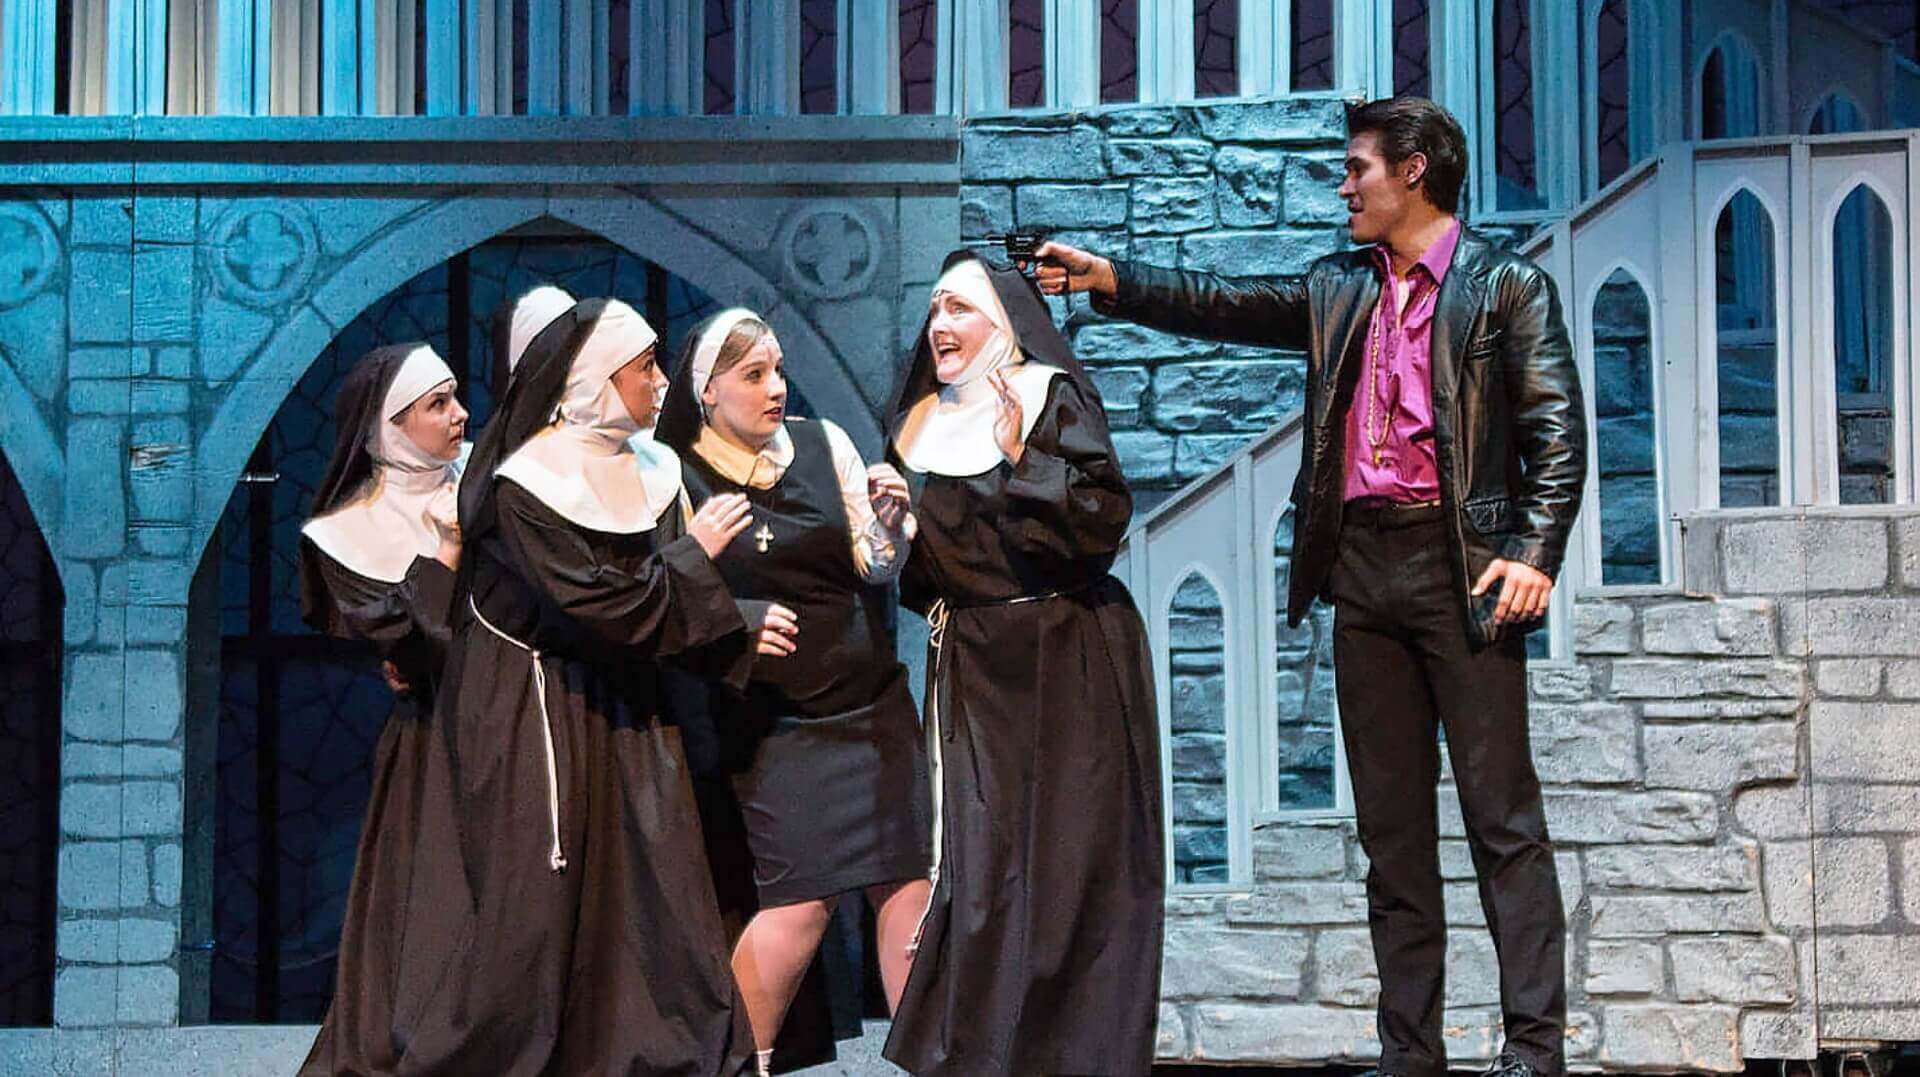 Mont Signor O'Hara - top of show - Sister Act Costume Rental pictures - Stagecraft Theatrical